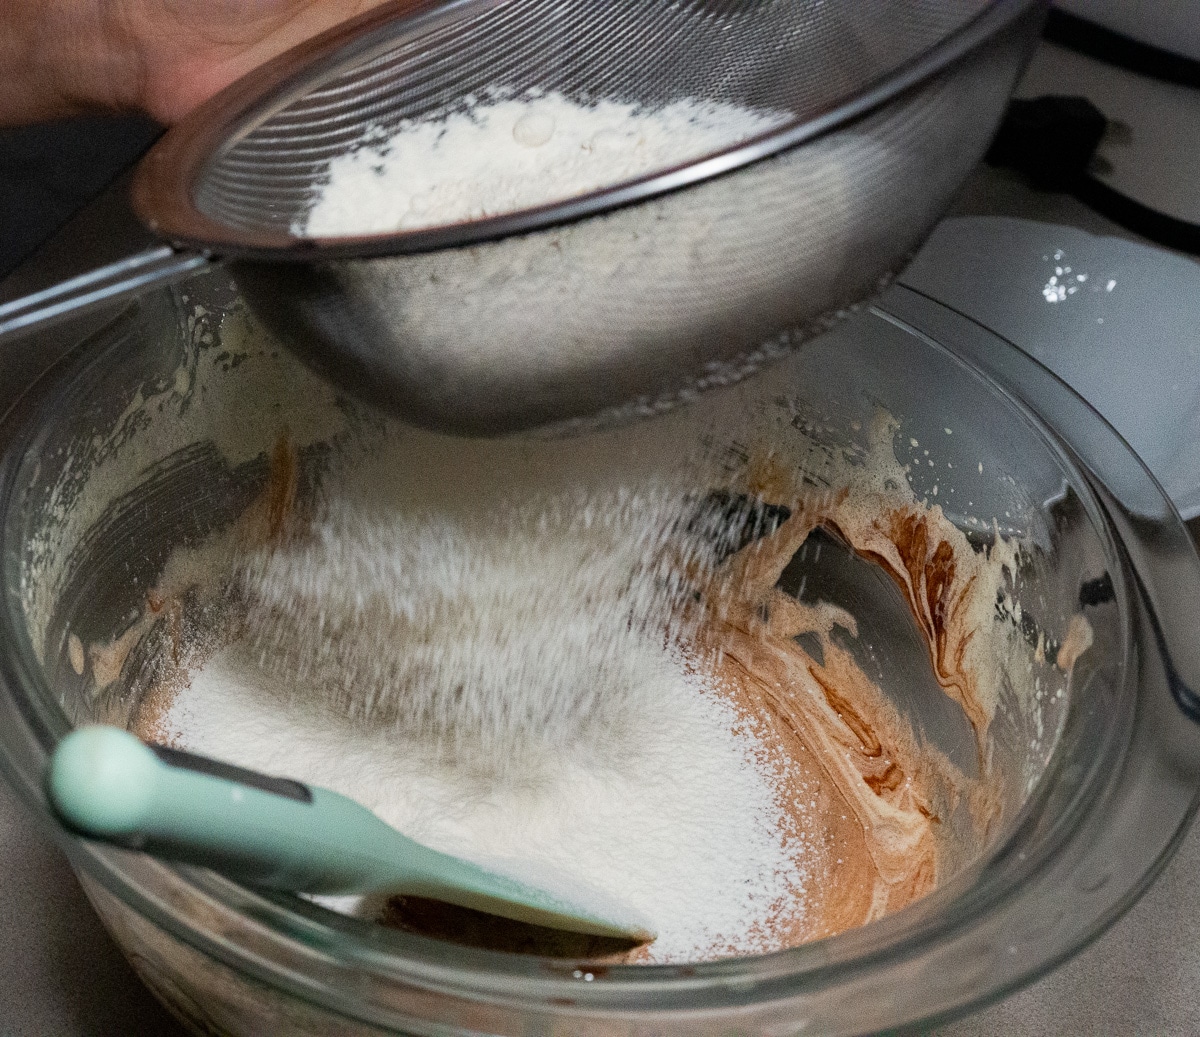 Sifting flour into the eggs mixture in a glass mixing bowl.